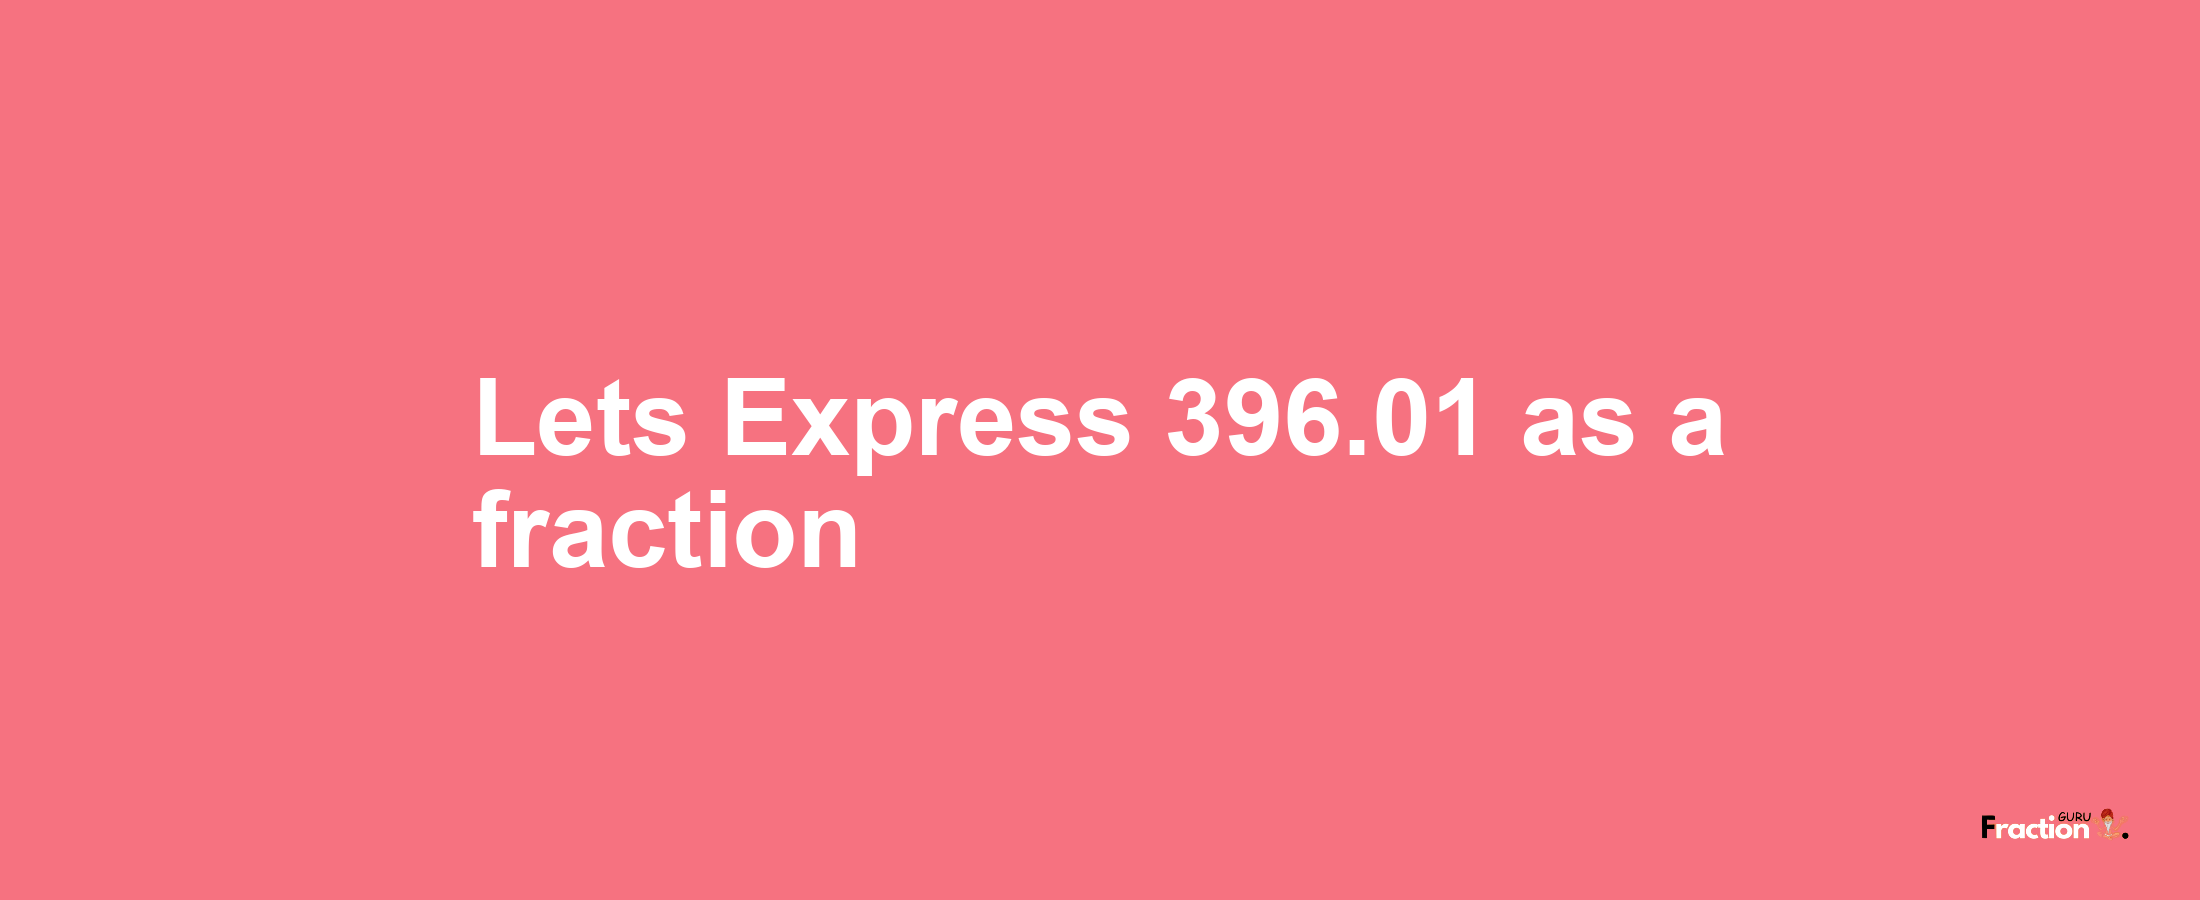 Lets Express 396.01 as afraction